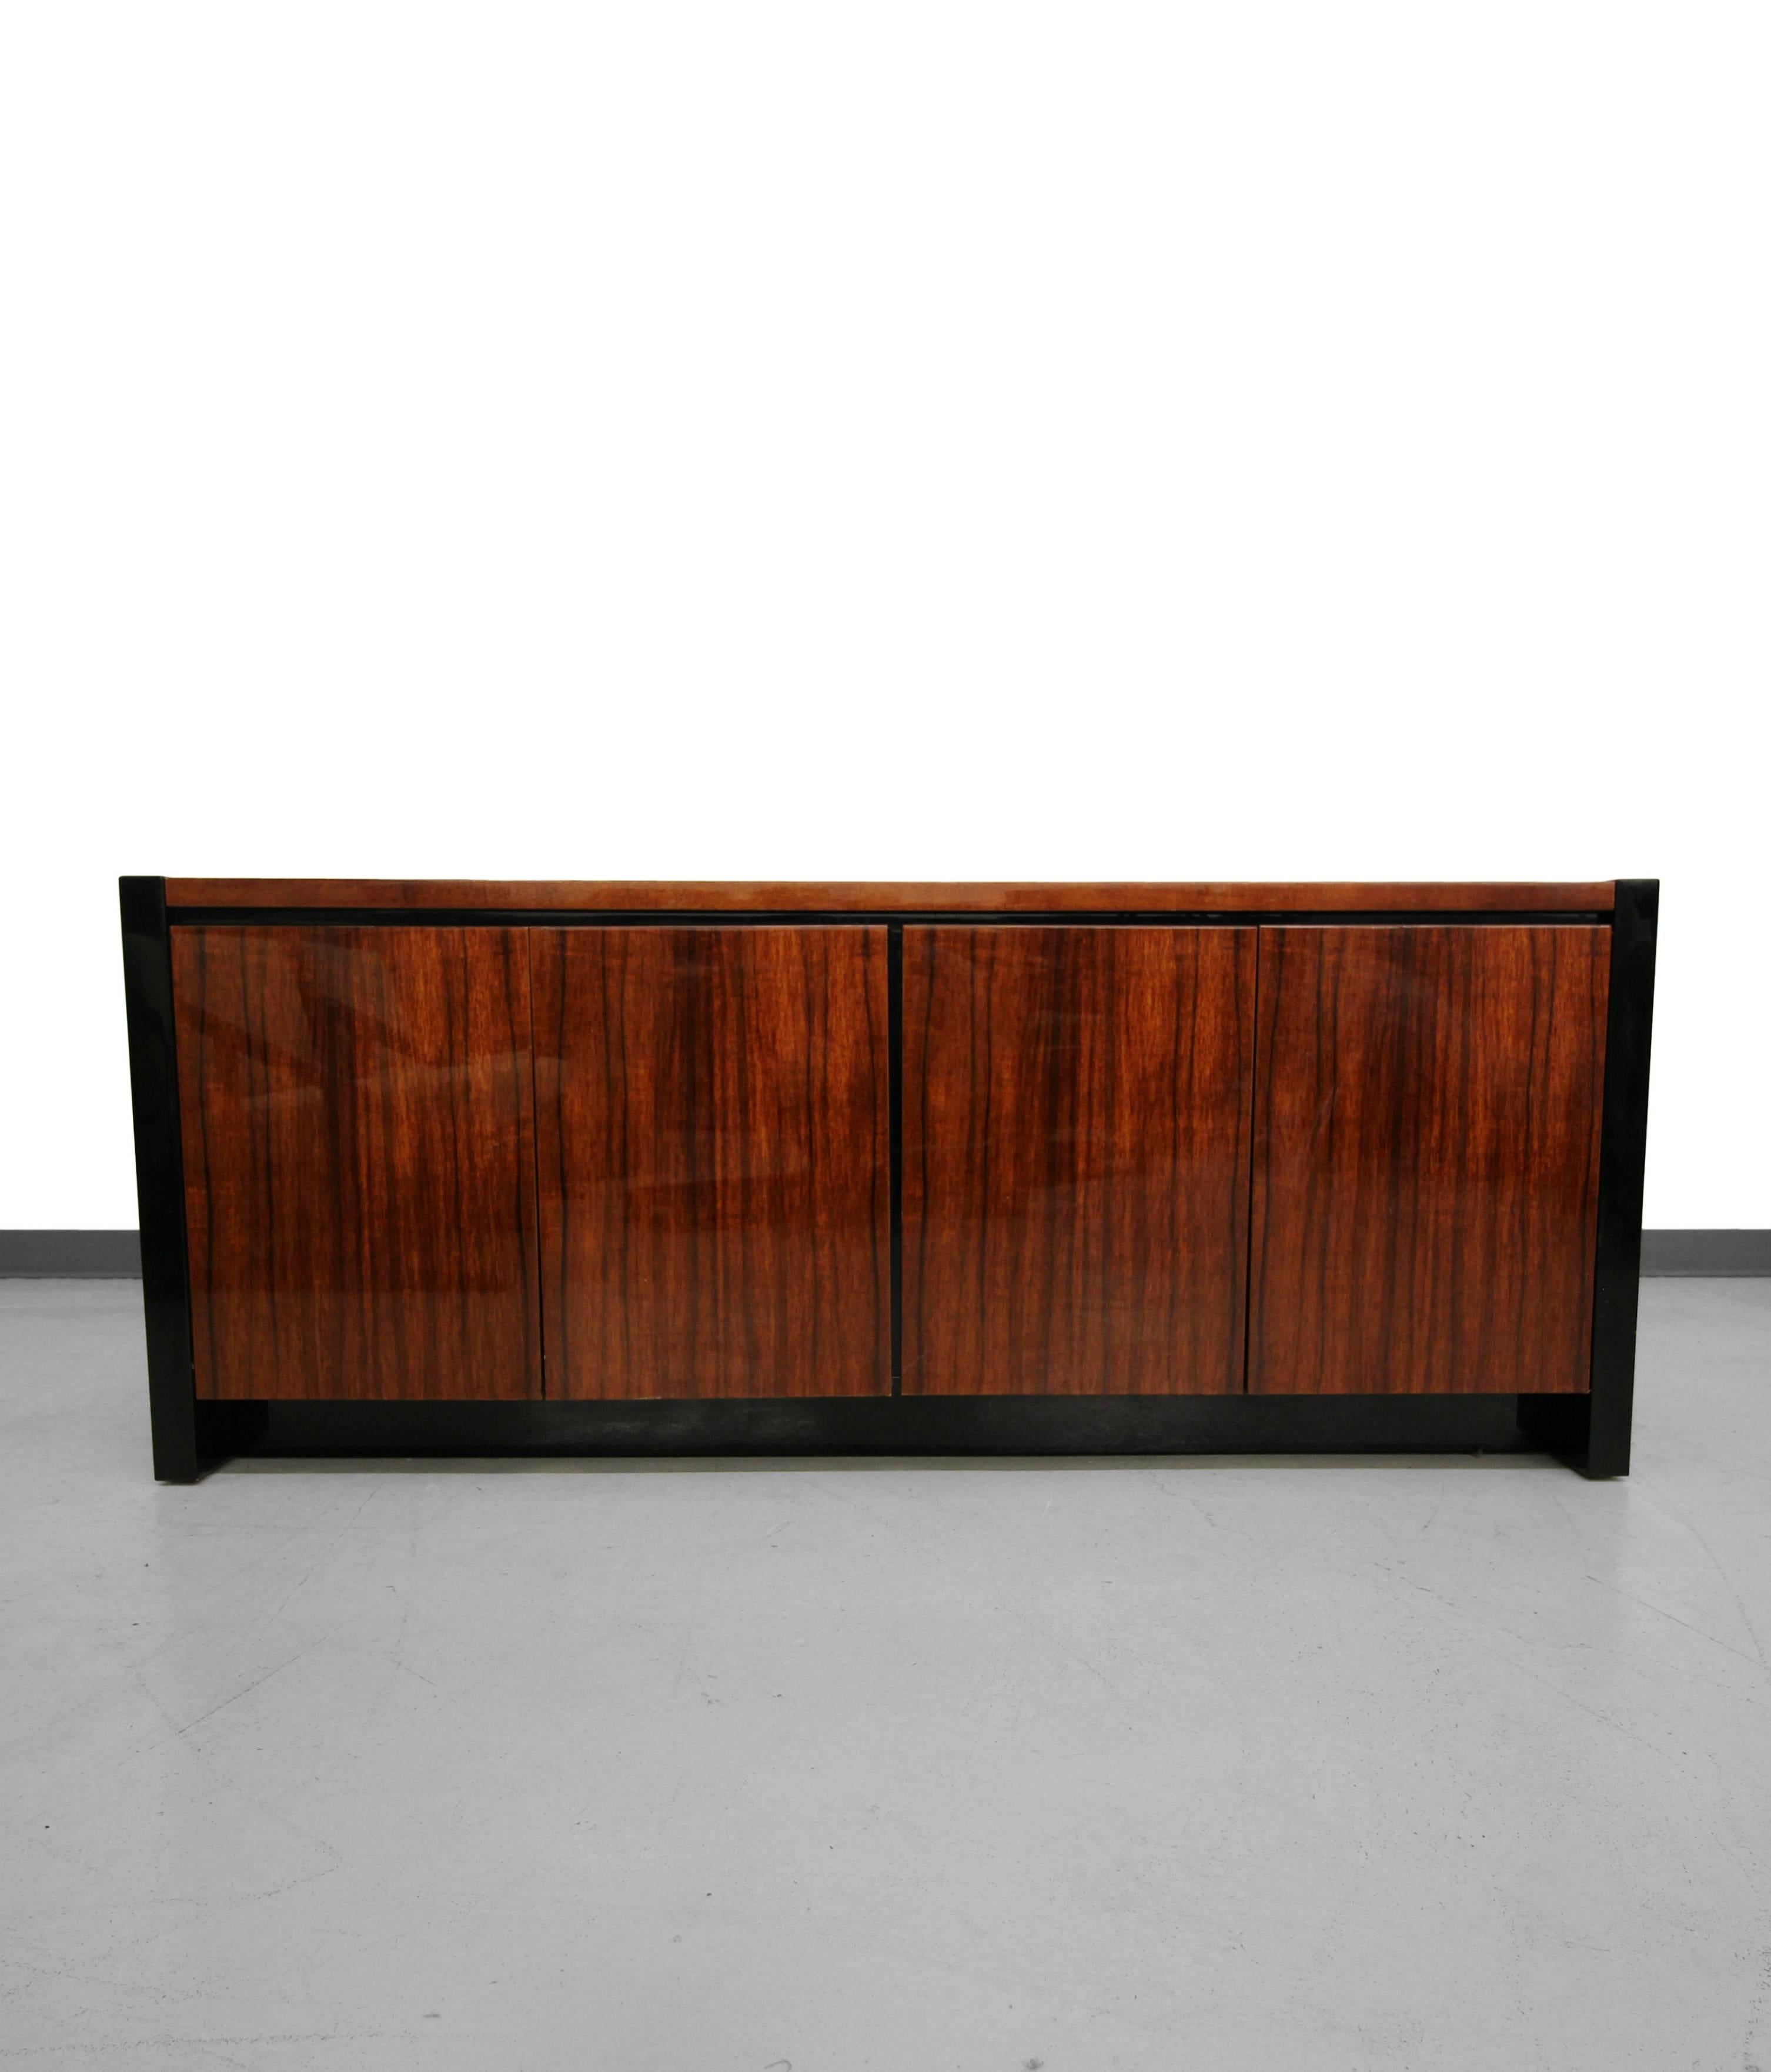 Absolutely stunning black lacquer and Koa wood credenza by Henredon for their Elan collection. This is a jaw dropping piece of very versatile piece of case work. It can be used as a buffet, credenza, entertainment cabinet or anywhere you're looking